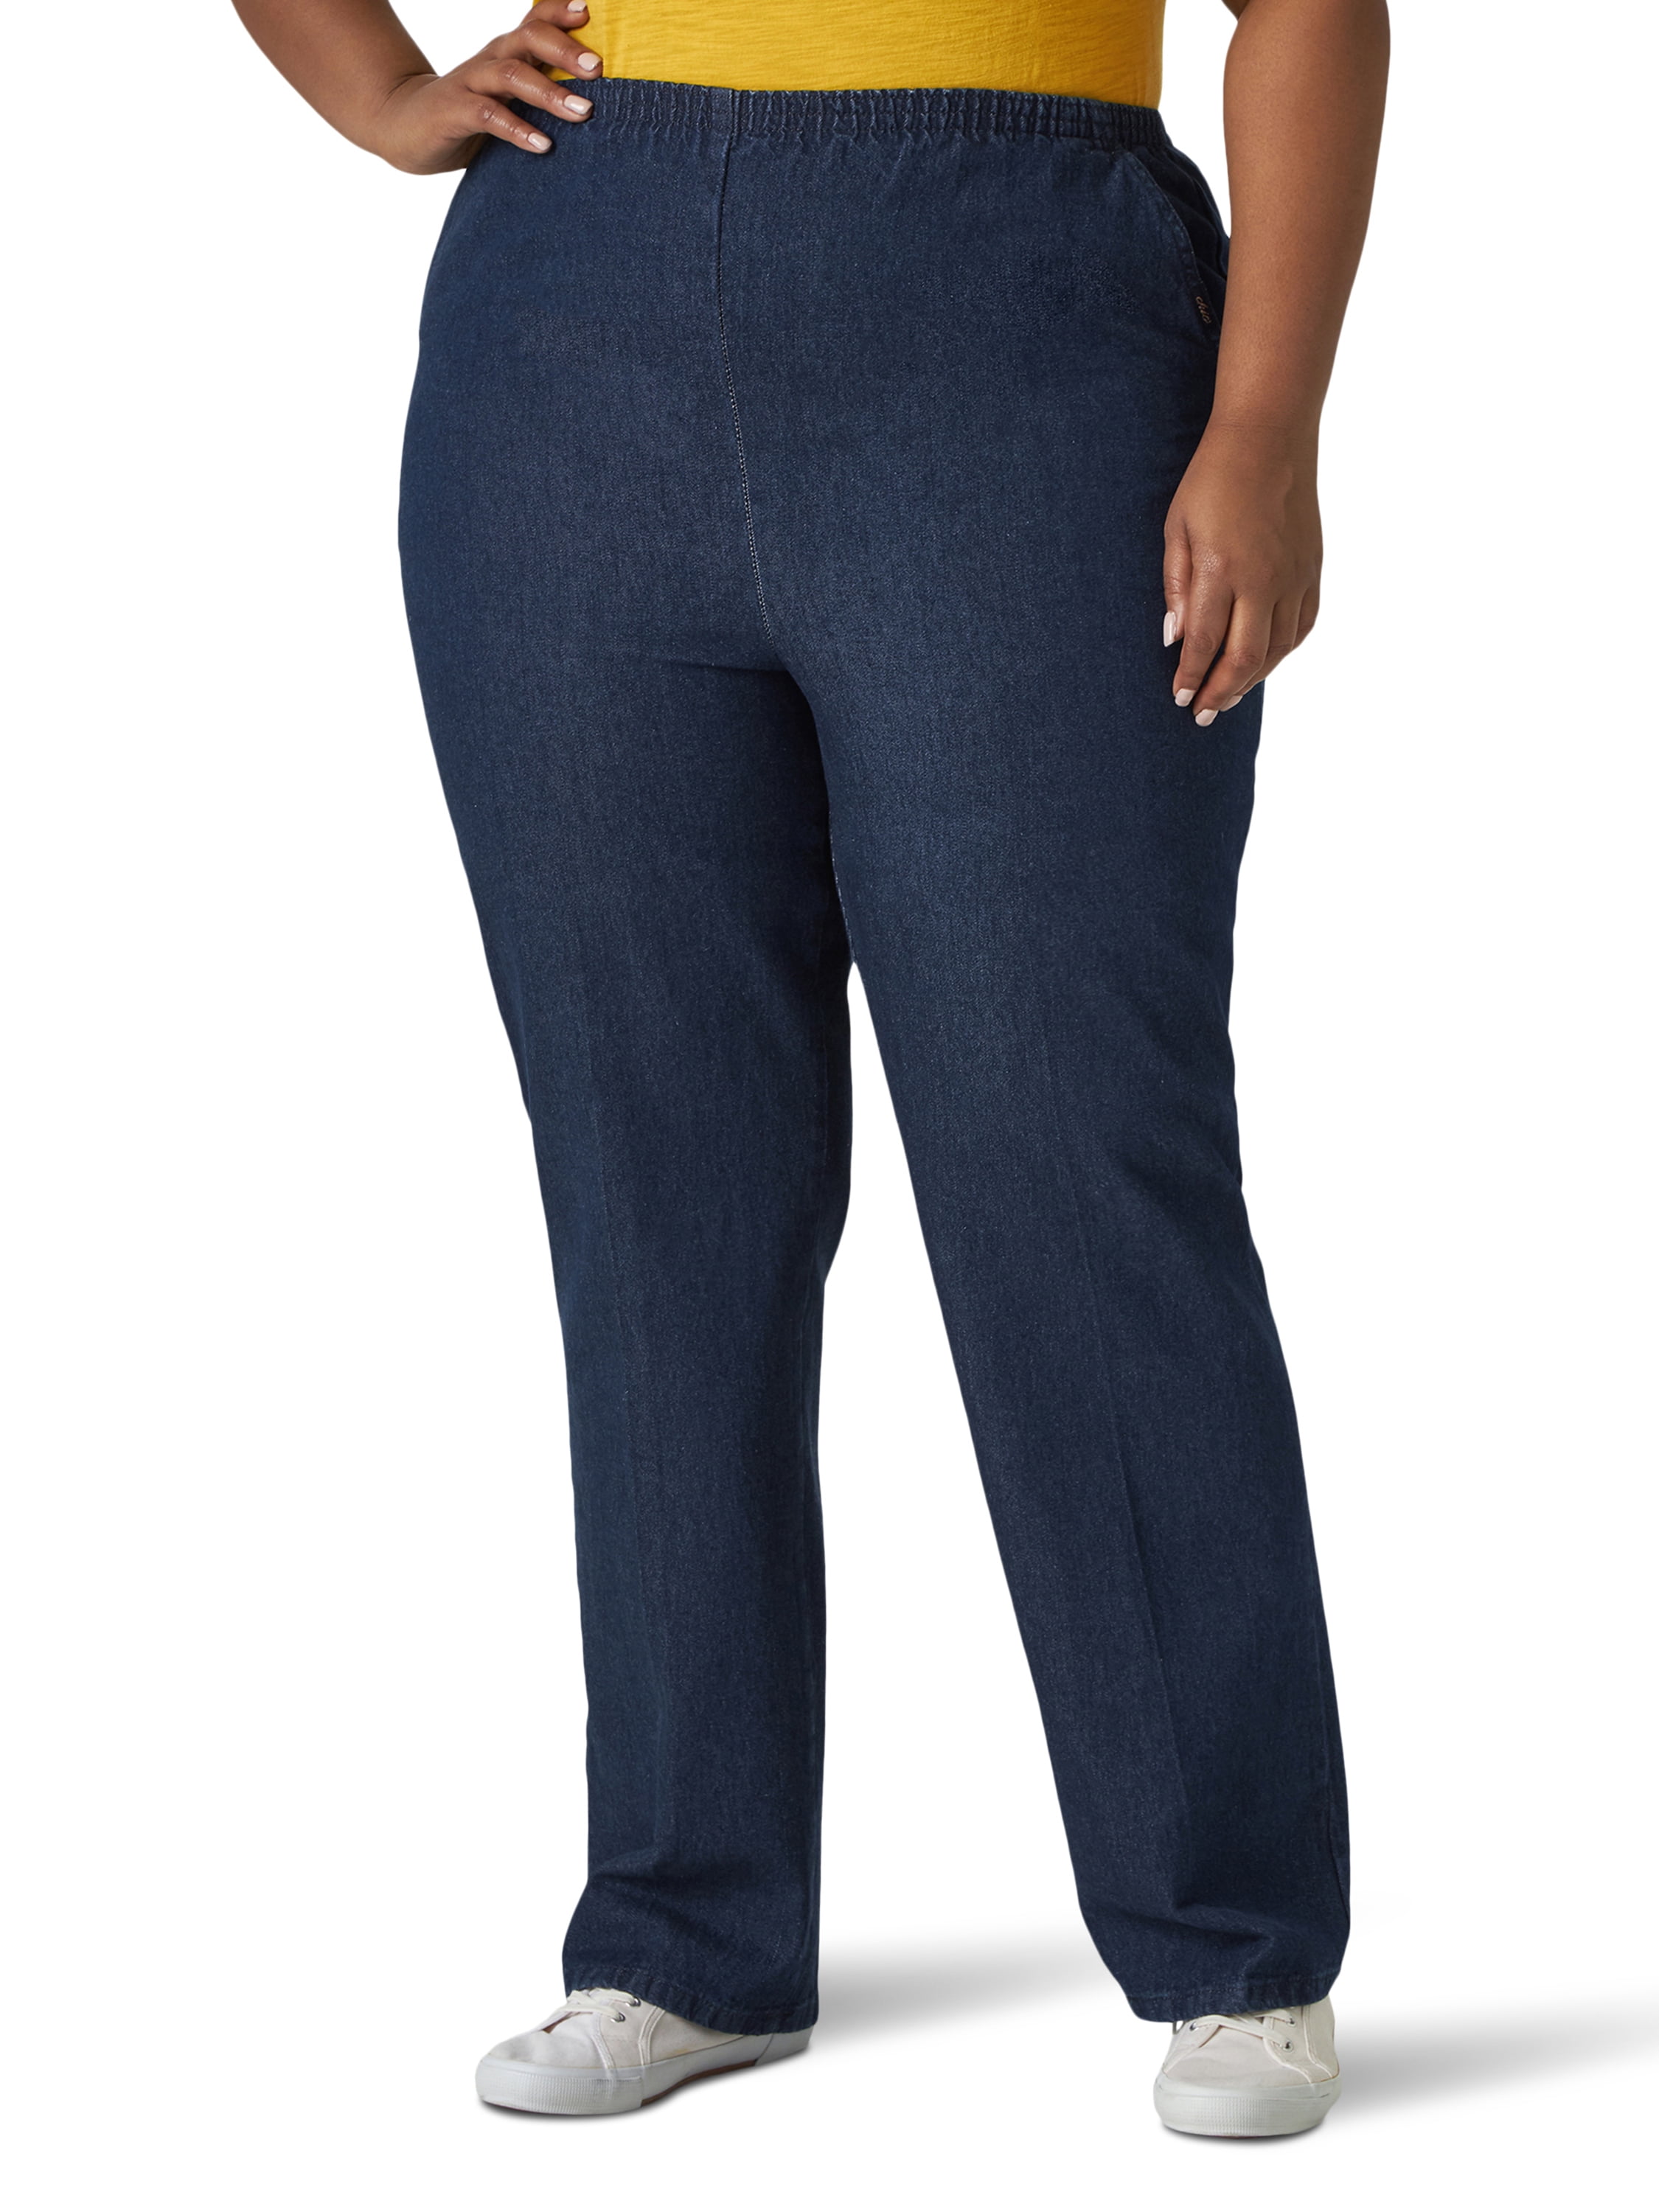 Chic Women's Plus Comfort Collection Elastic Waist Pull On Jean 